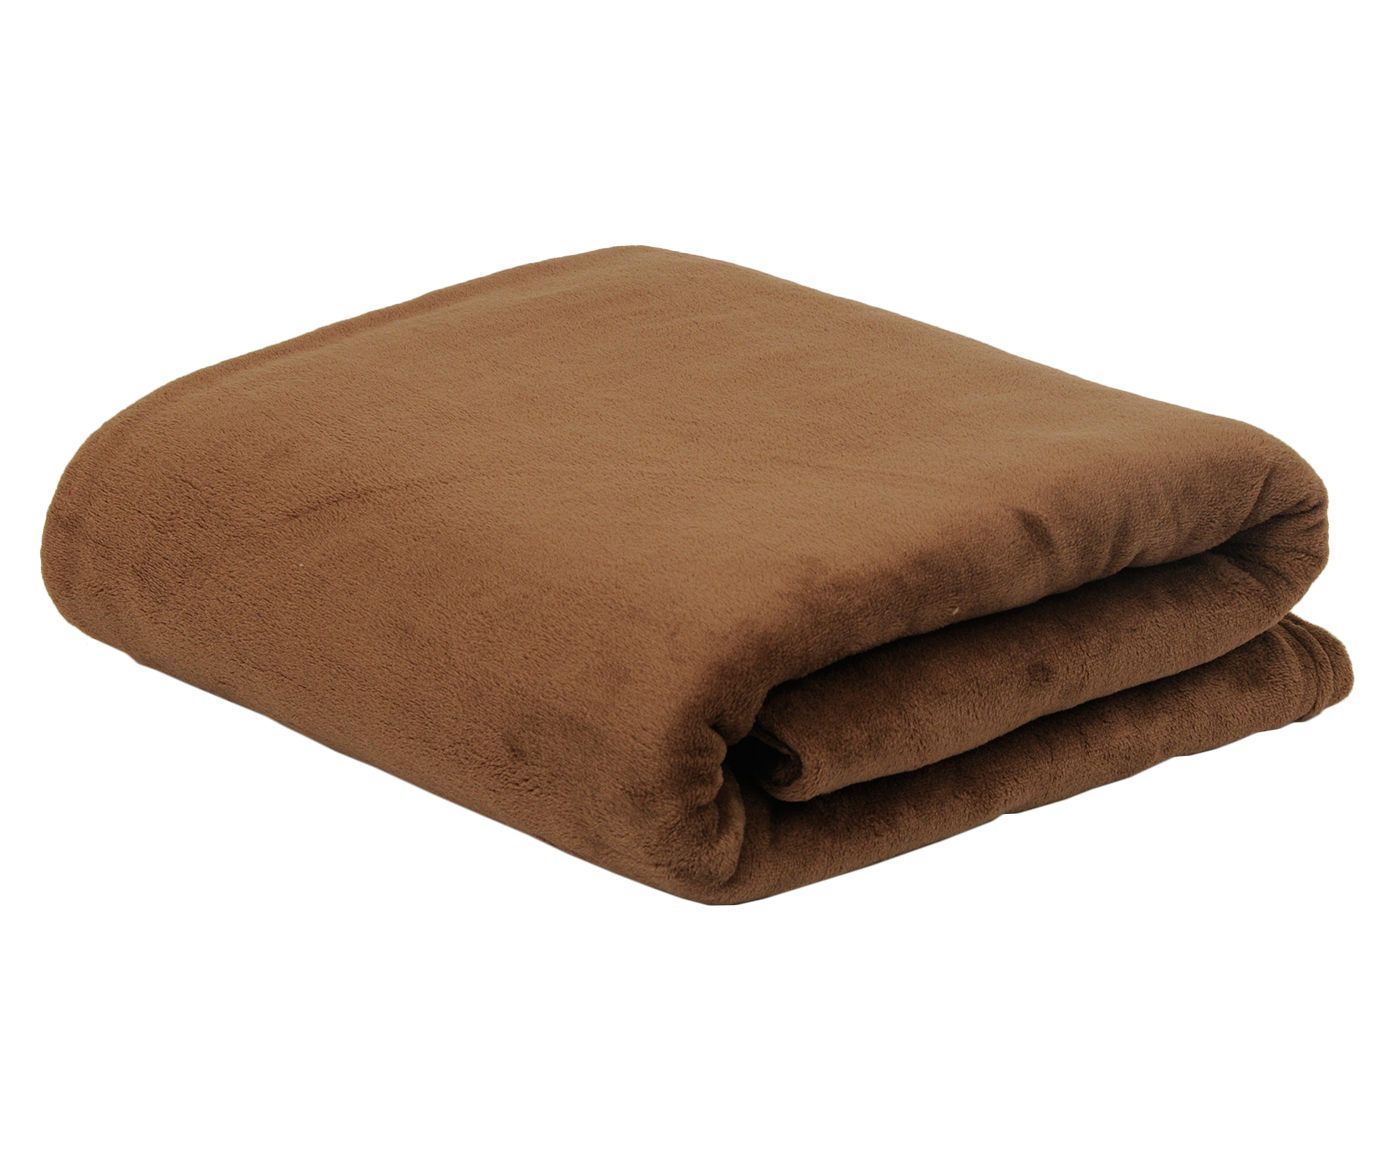 Manta mifra sand - para cama queen size | Westwing.com.br